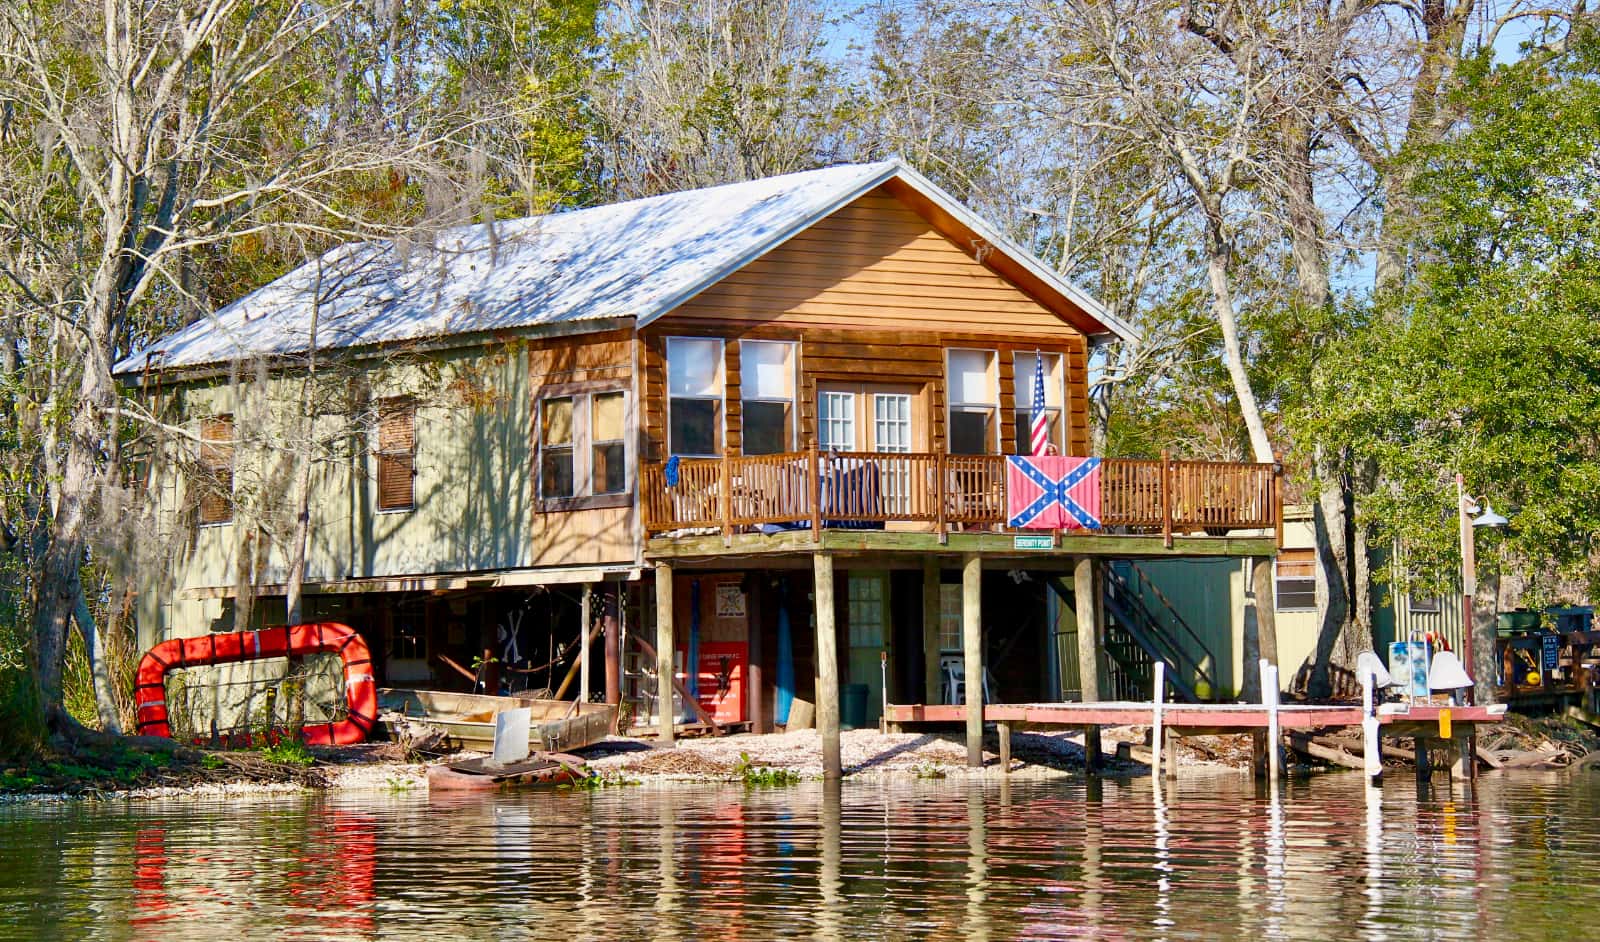 Old cabin sitting on shore of river with Confederate flag